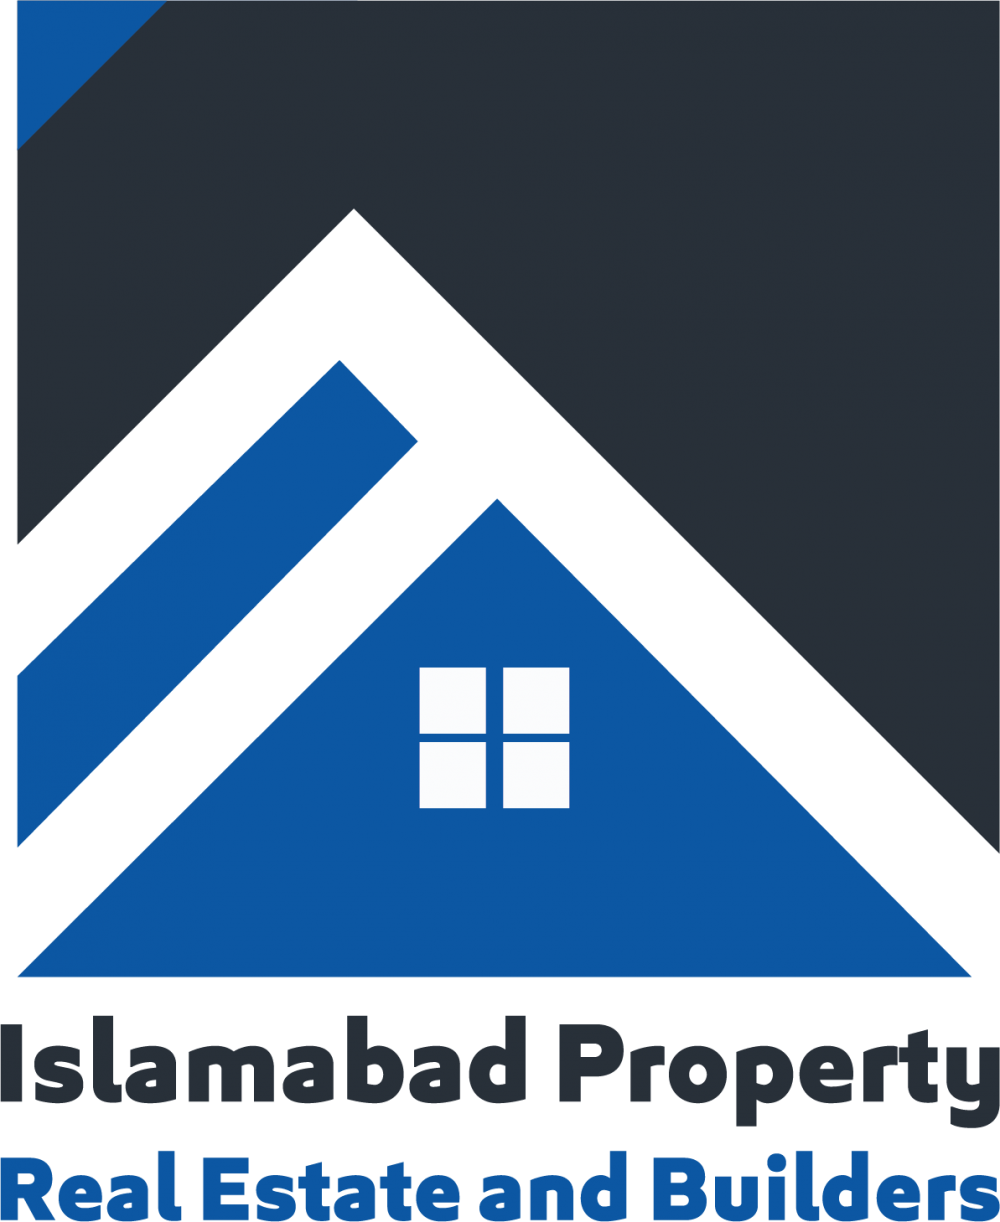 Realestate Agent Bashir Ahmed   working in Realestate Agency Islamabad Property Real Estate and Builders 